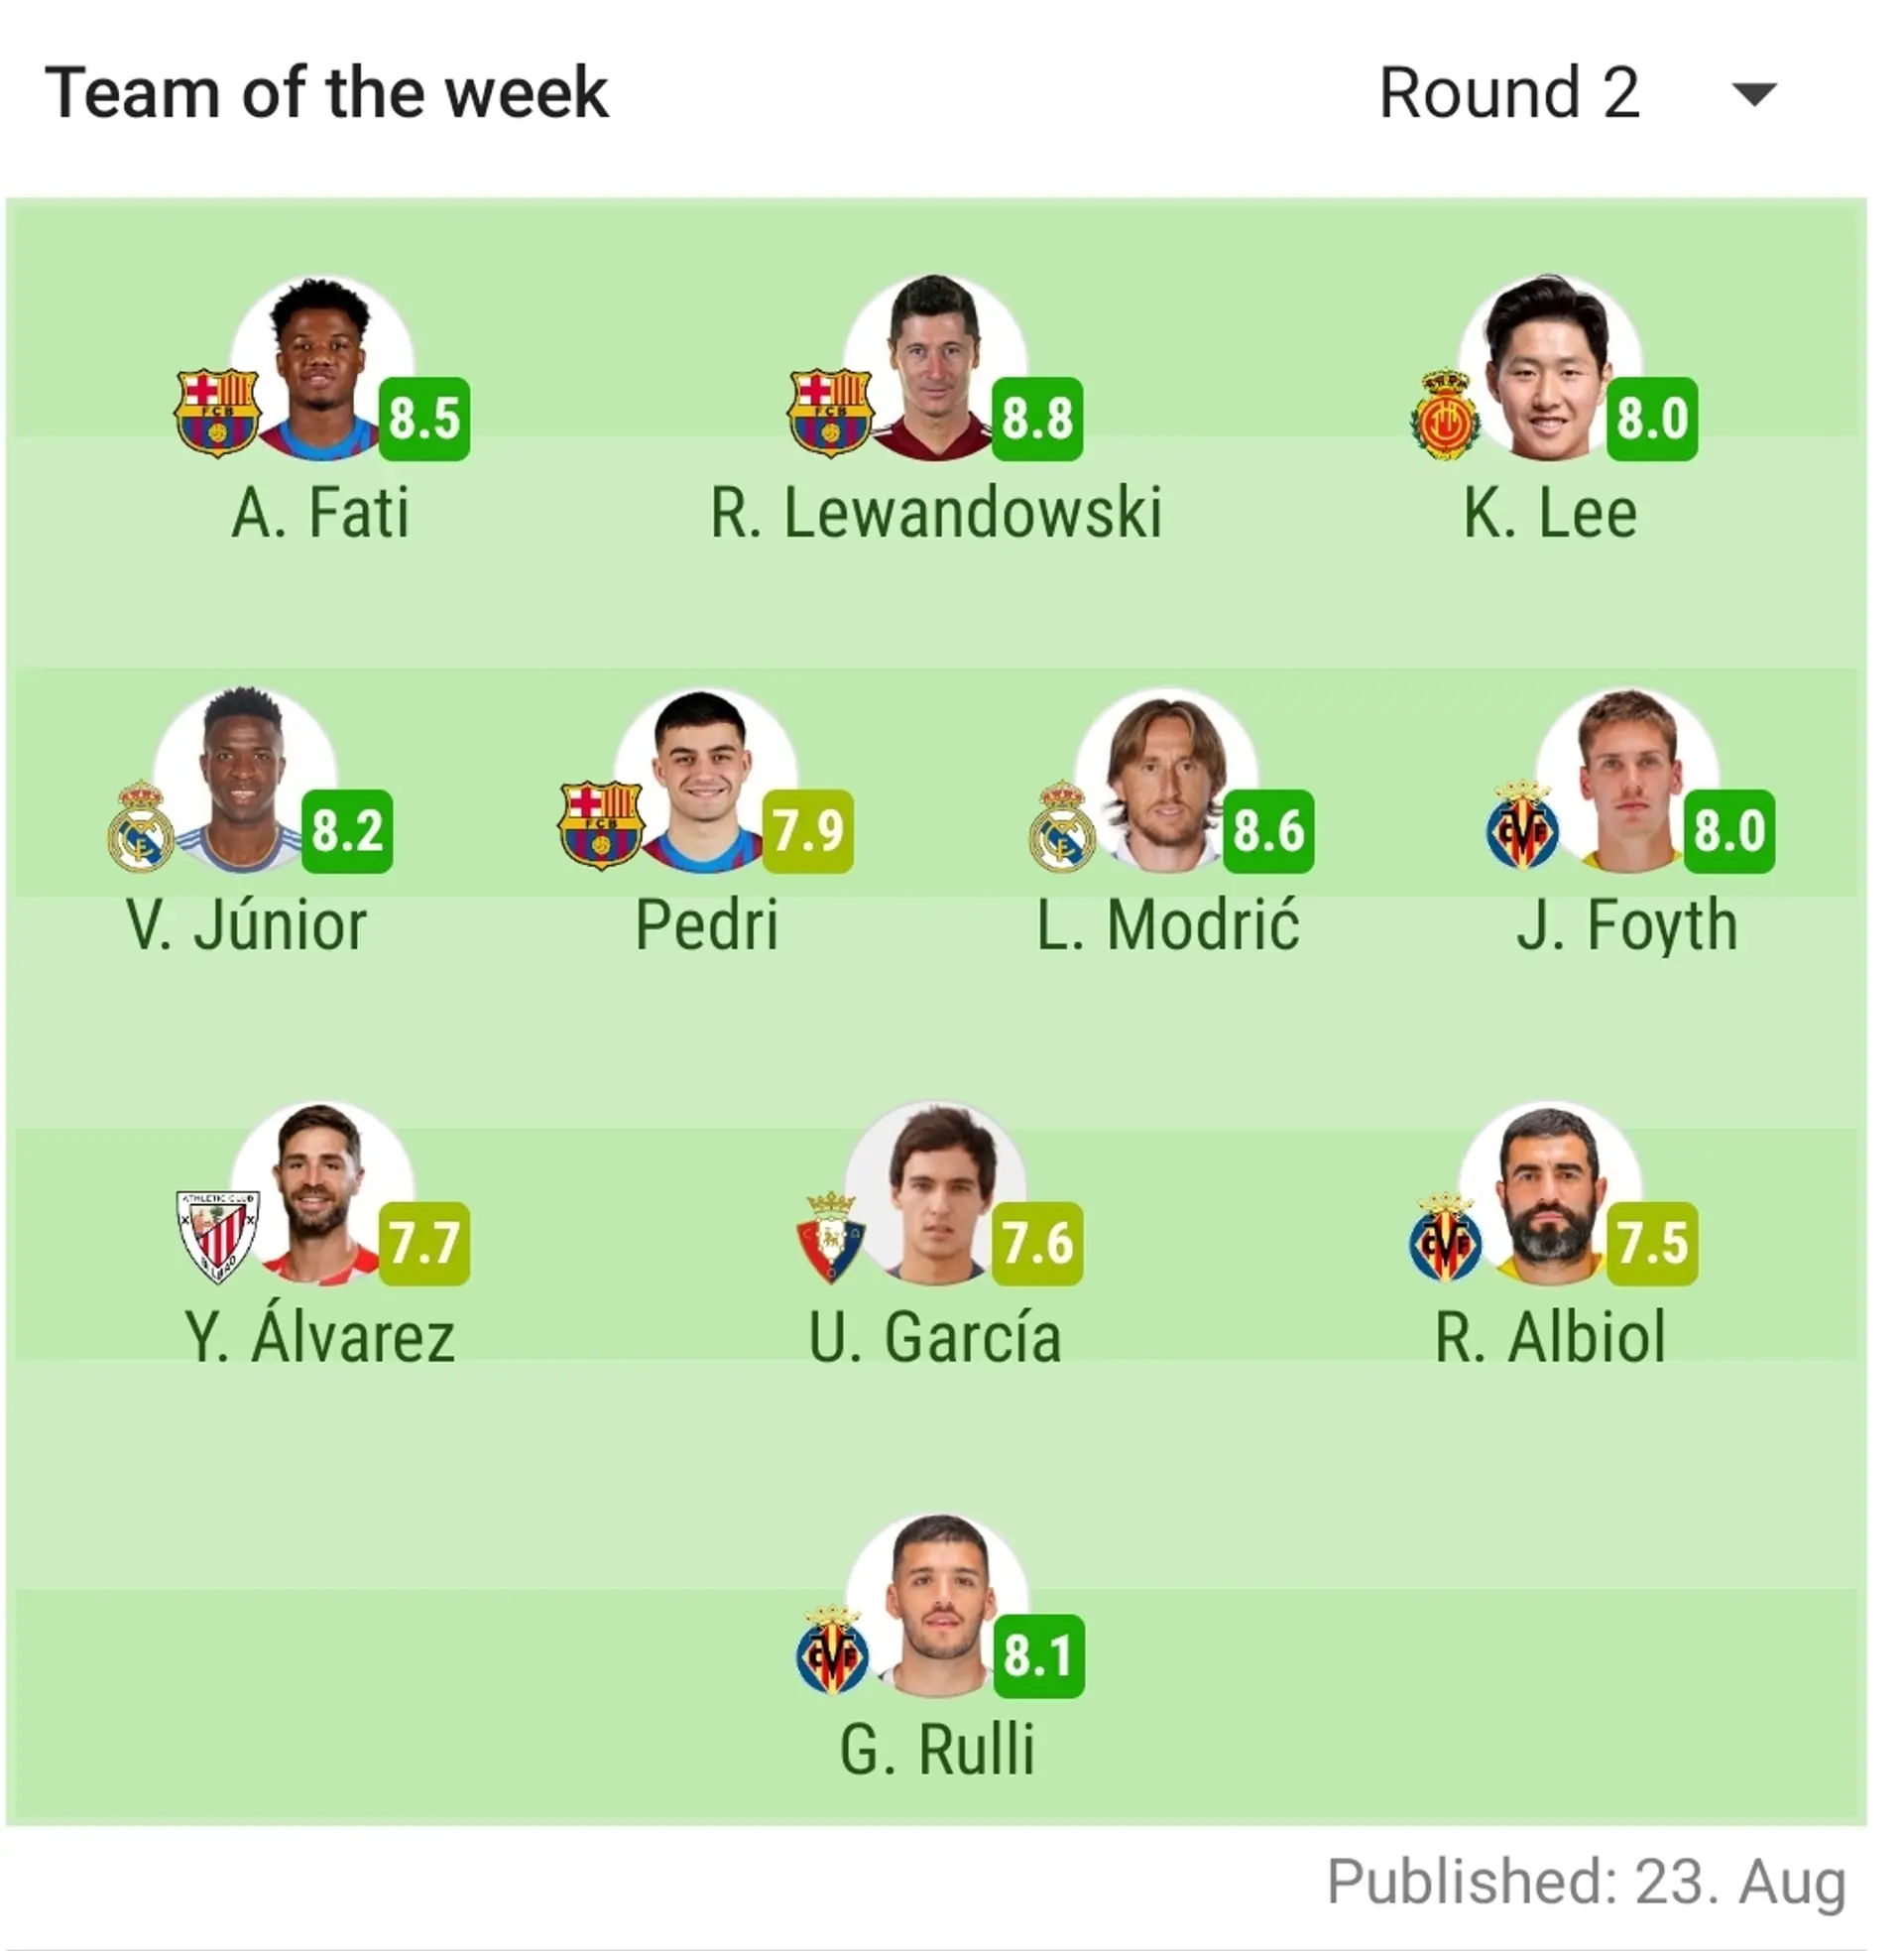 We came out as the team with the highest number of players in the "team of the week" 🥰. Oh sorry! Villareal too 😁